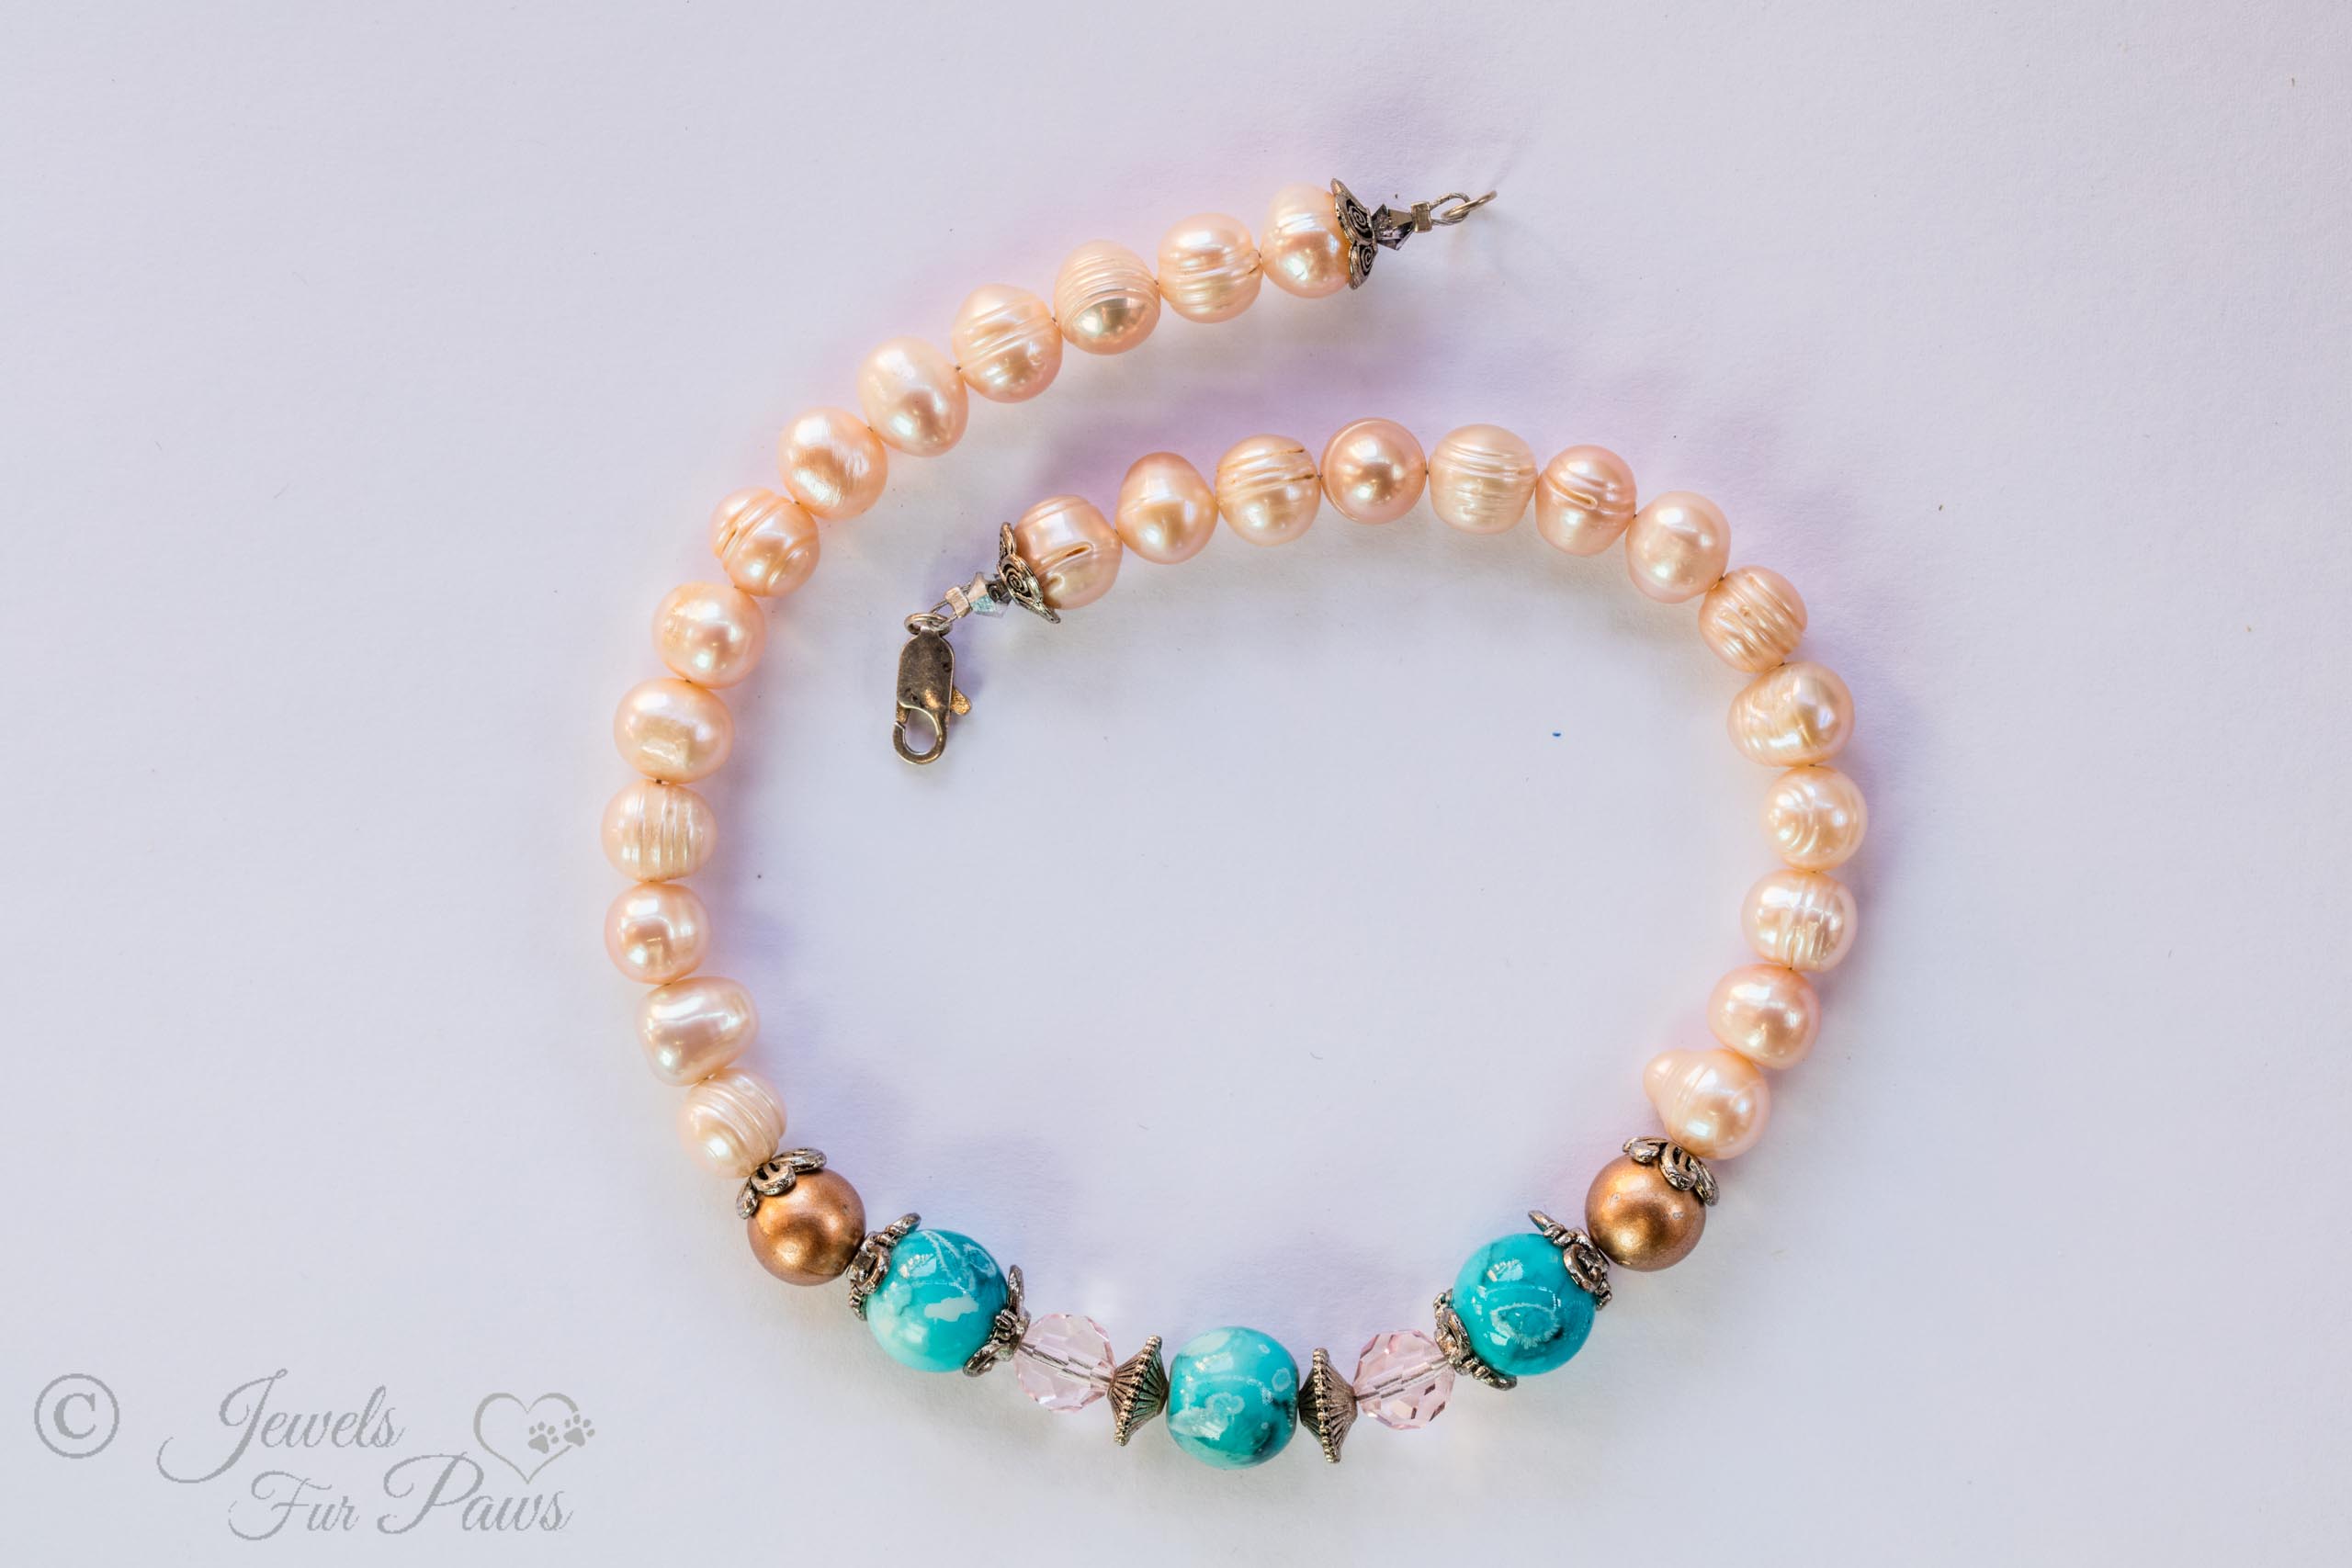 antique vintage Japanese cultured pearls complementing three turquoise marbleized bads with two copper pearls and pale pink crystals